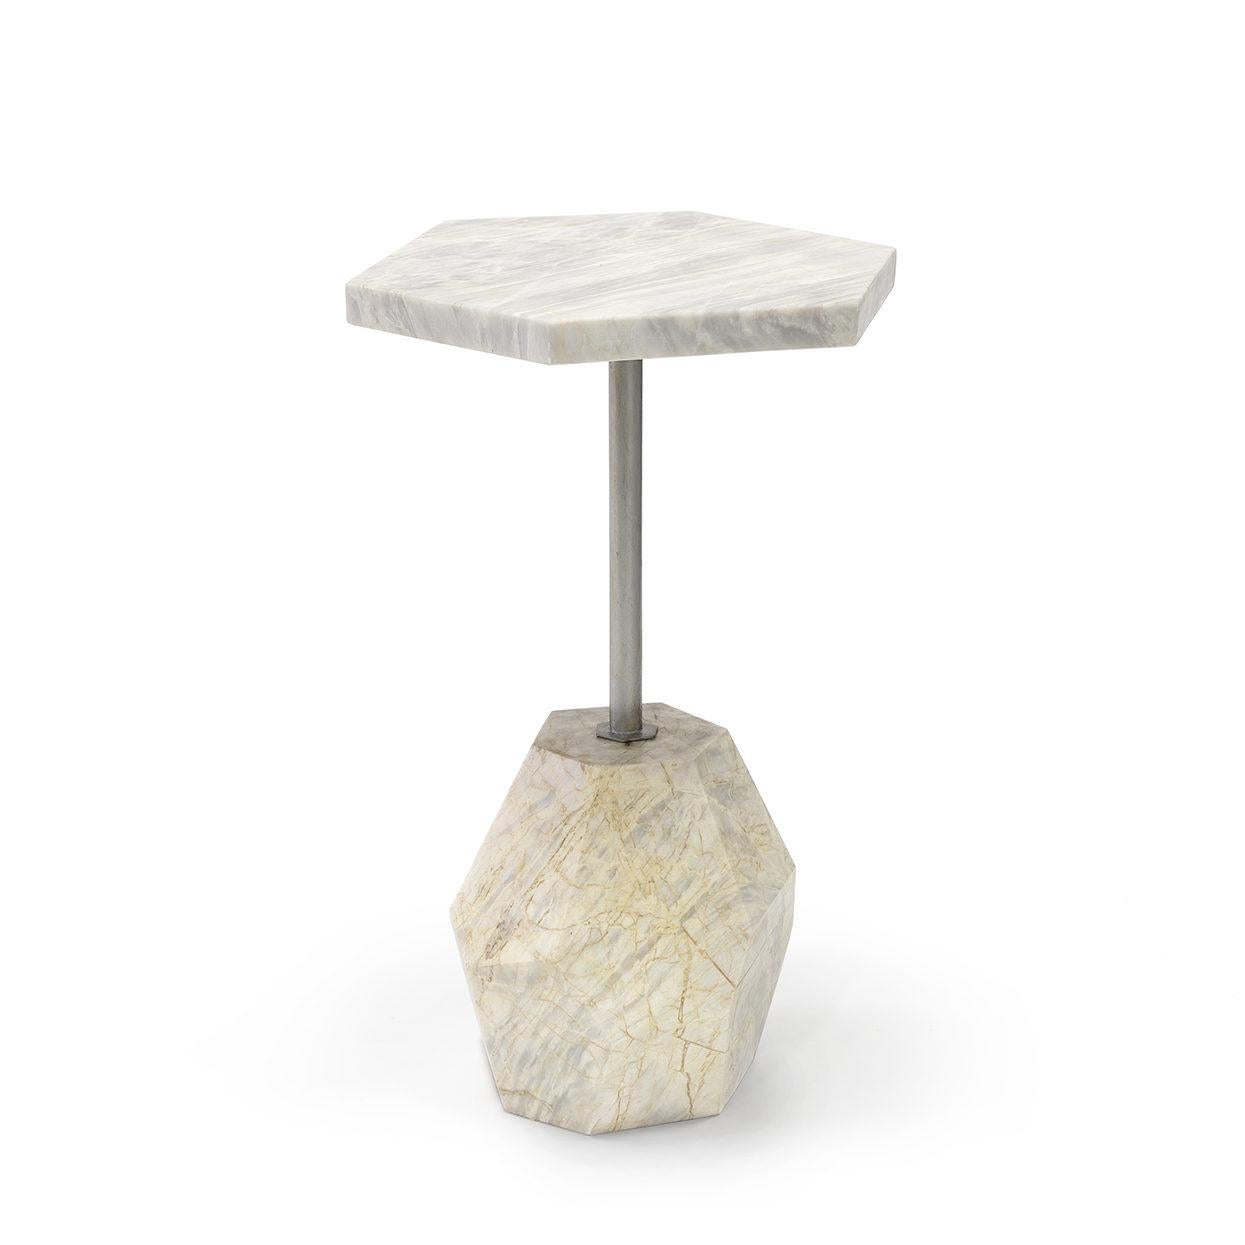 Each geometric side tables in this set is a geometrically bold design statements composed of natural materials. 

Sculptural elements with unmistakable presences - the shapes composing each table can be found in nature in the form of raw rocks.